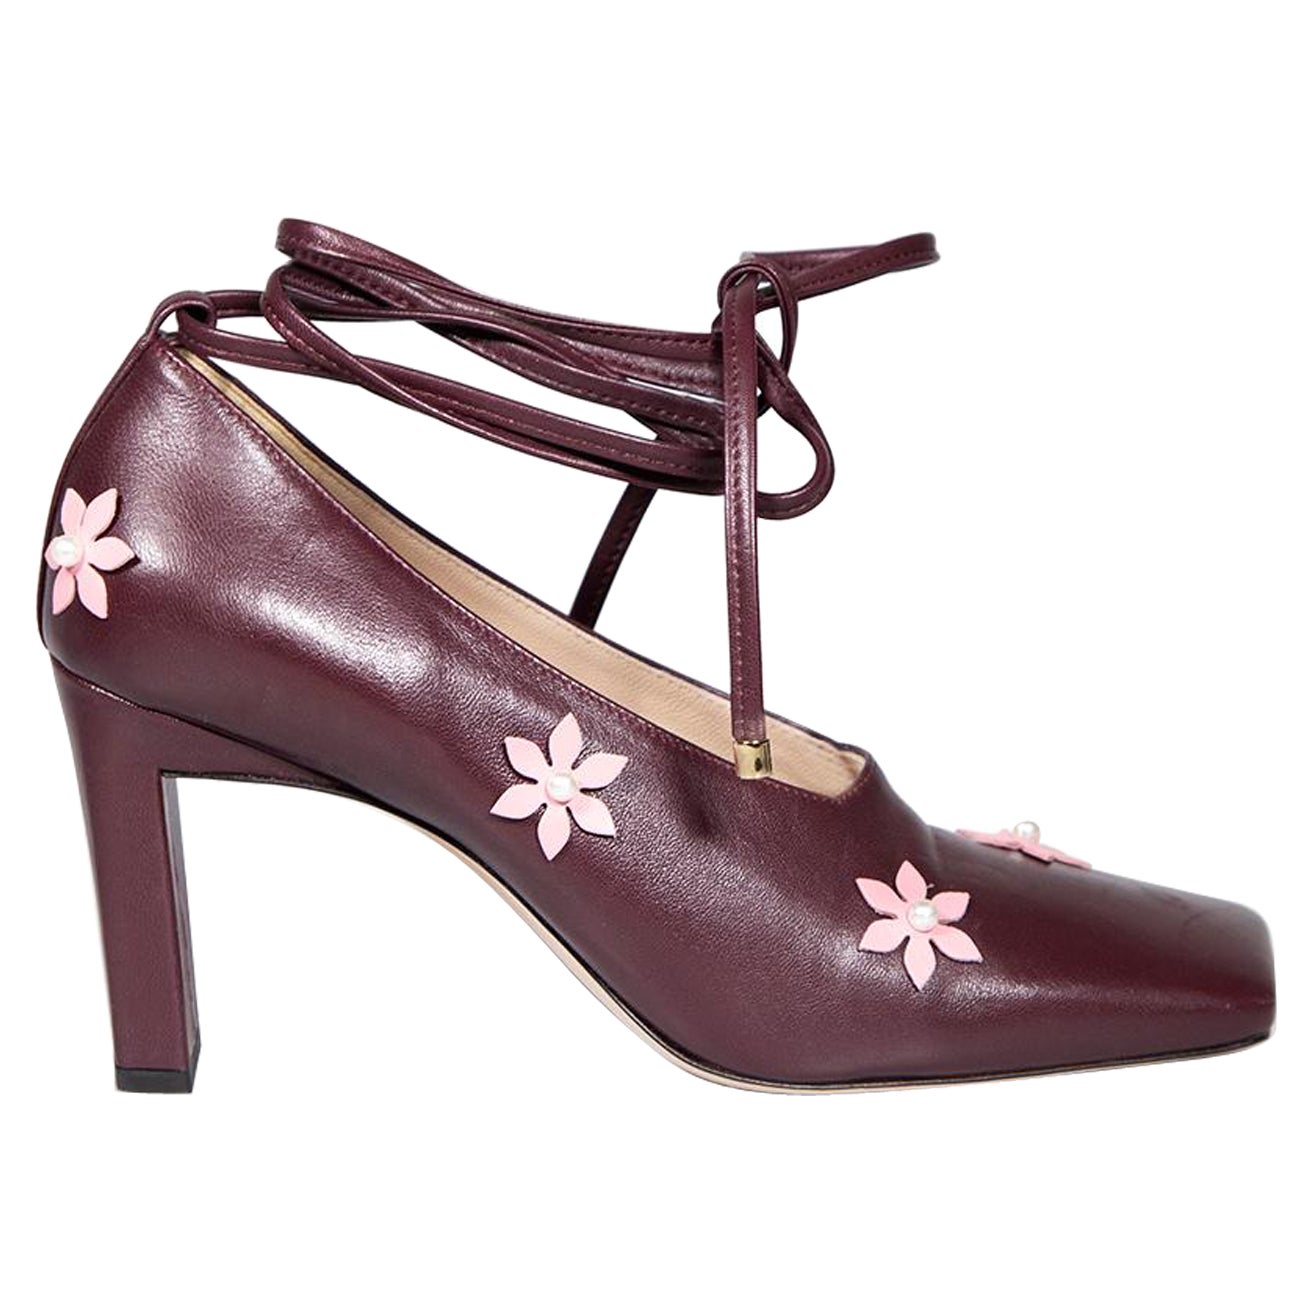 Wandler Burgundy Leather Floral Square Toe Heels Size IT 38.5 For Sale